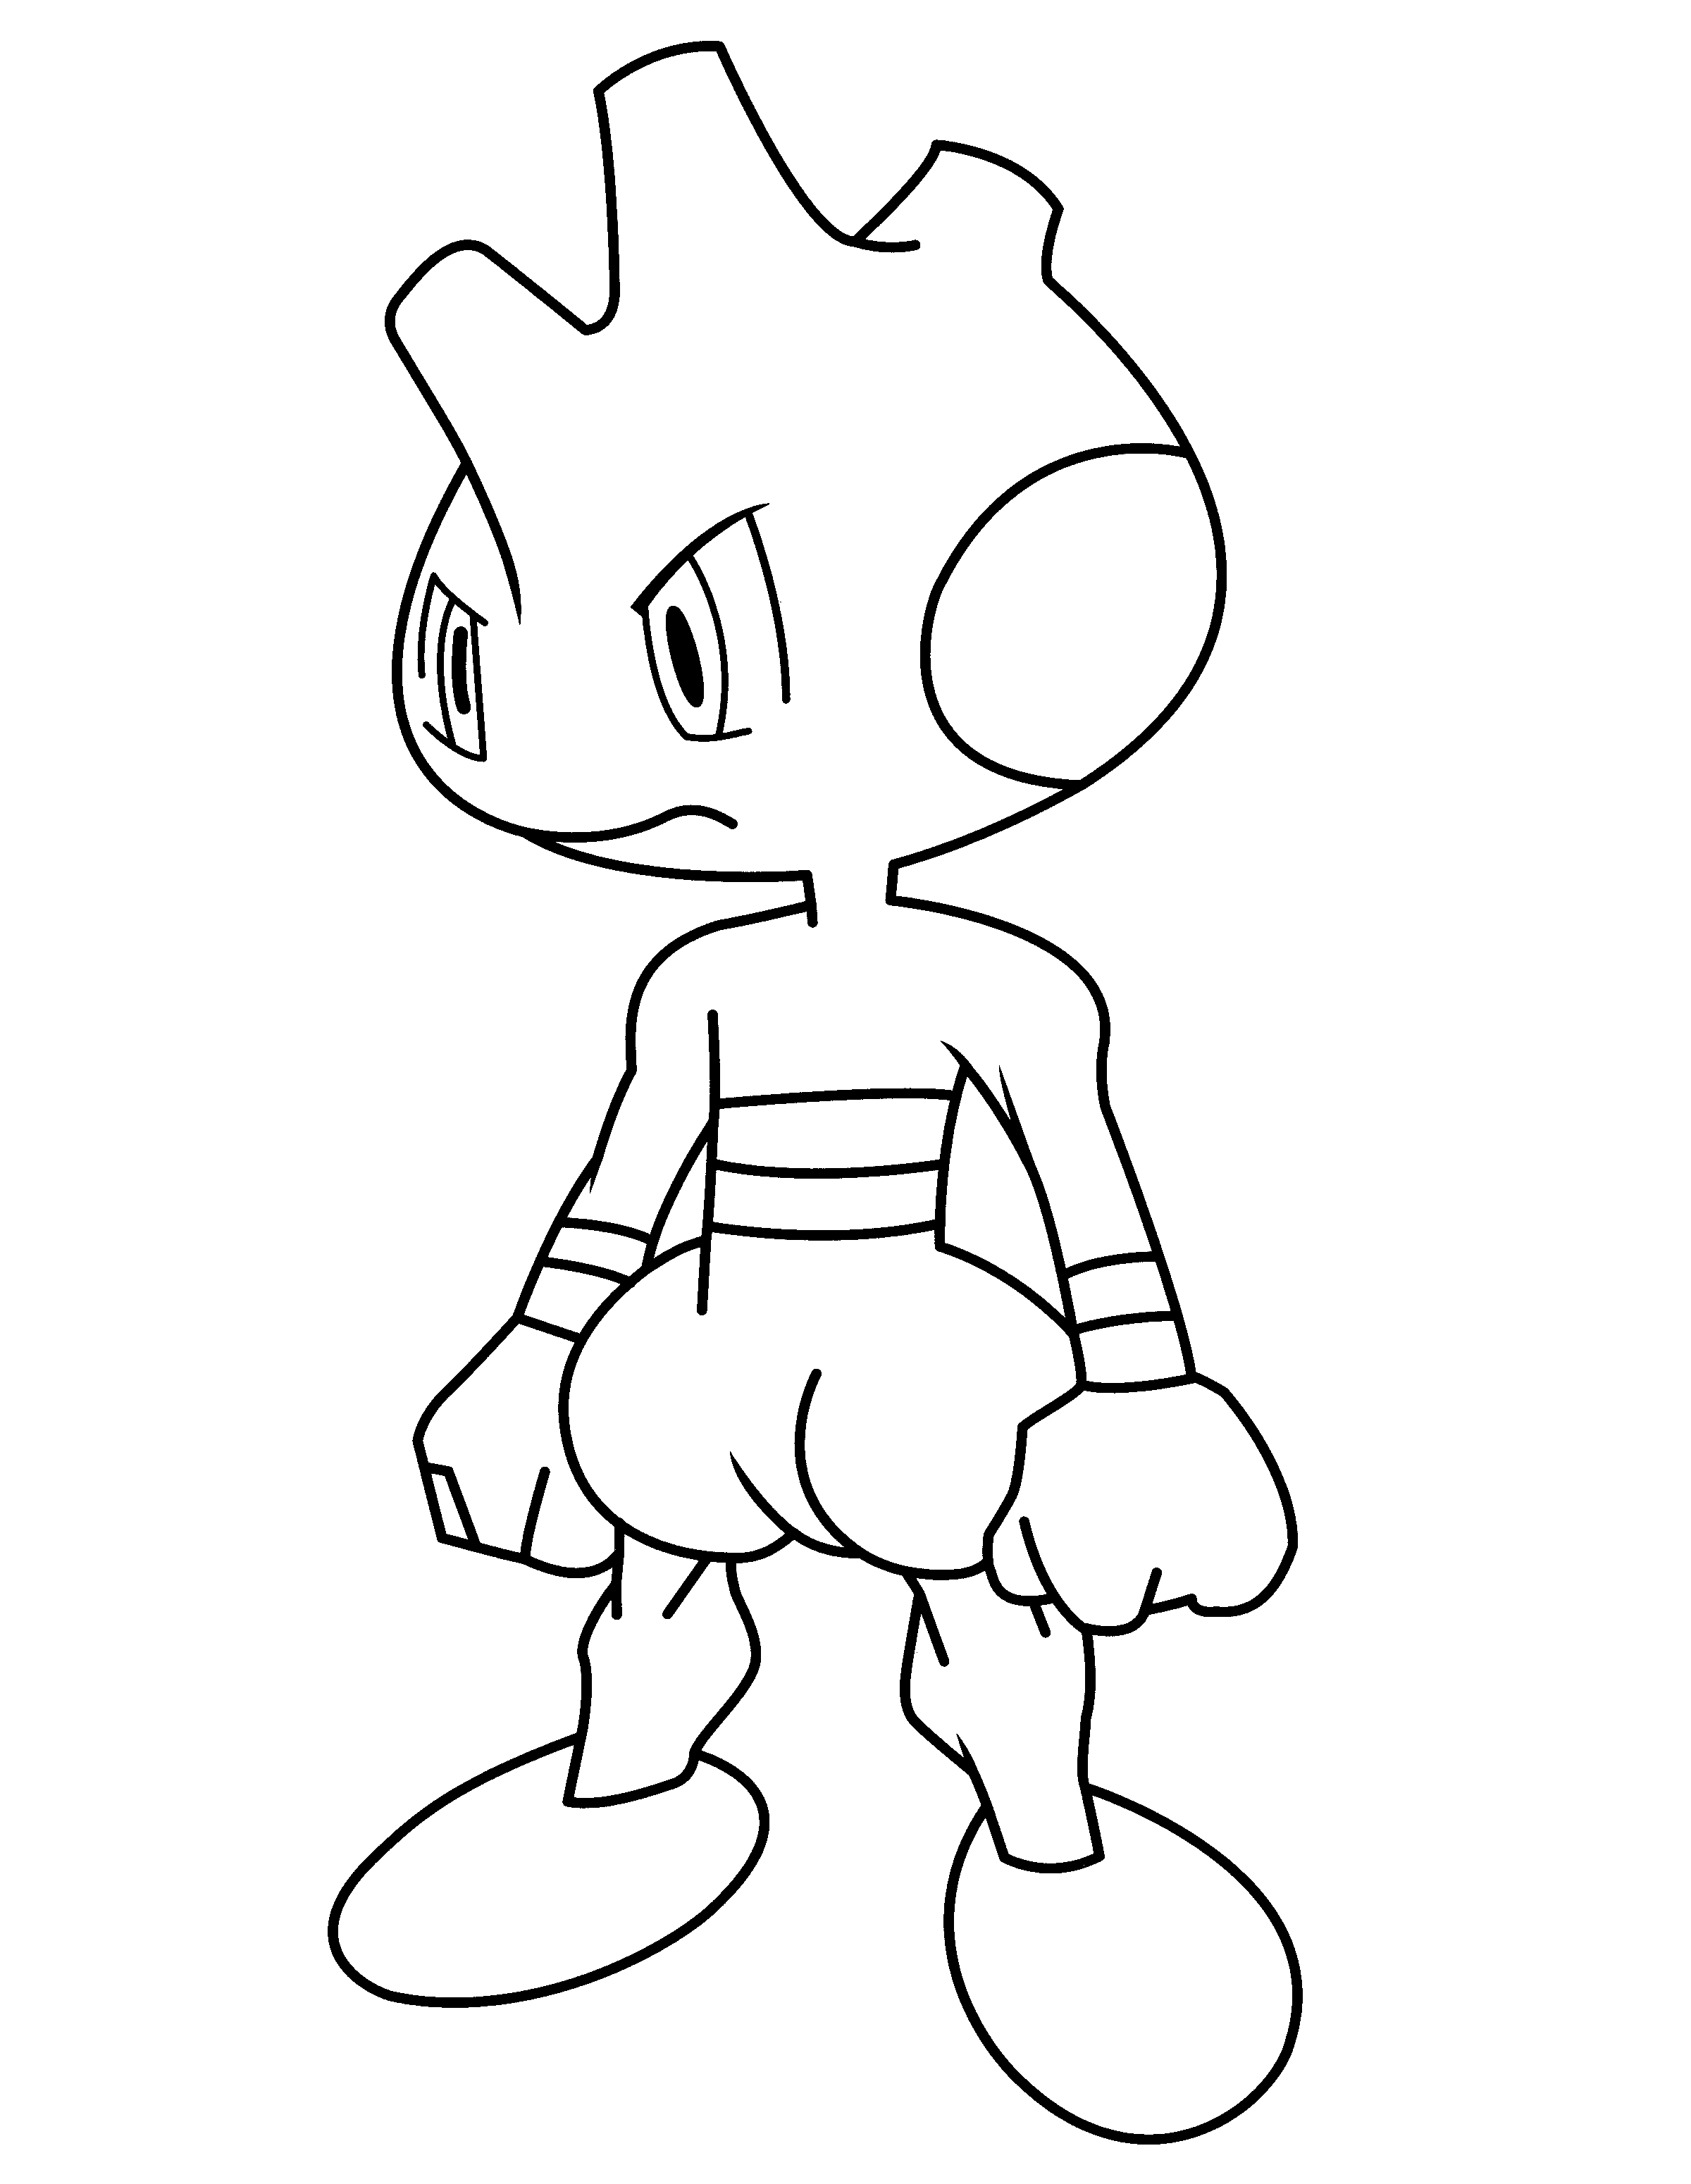 animated-coloring-pages-pokemon-image-0066